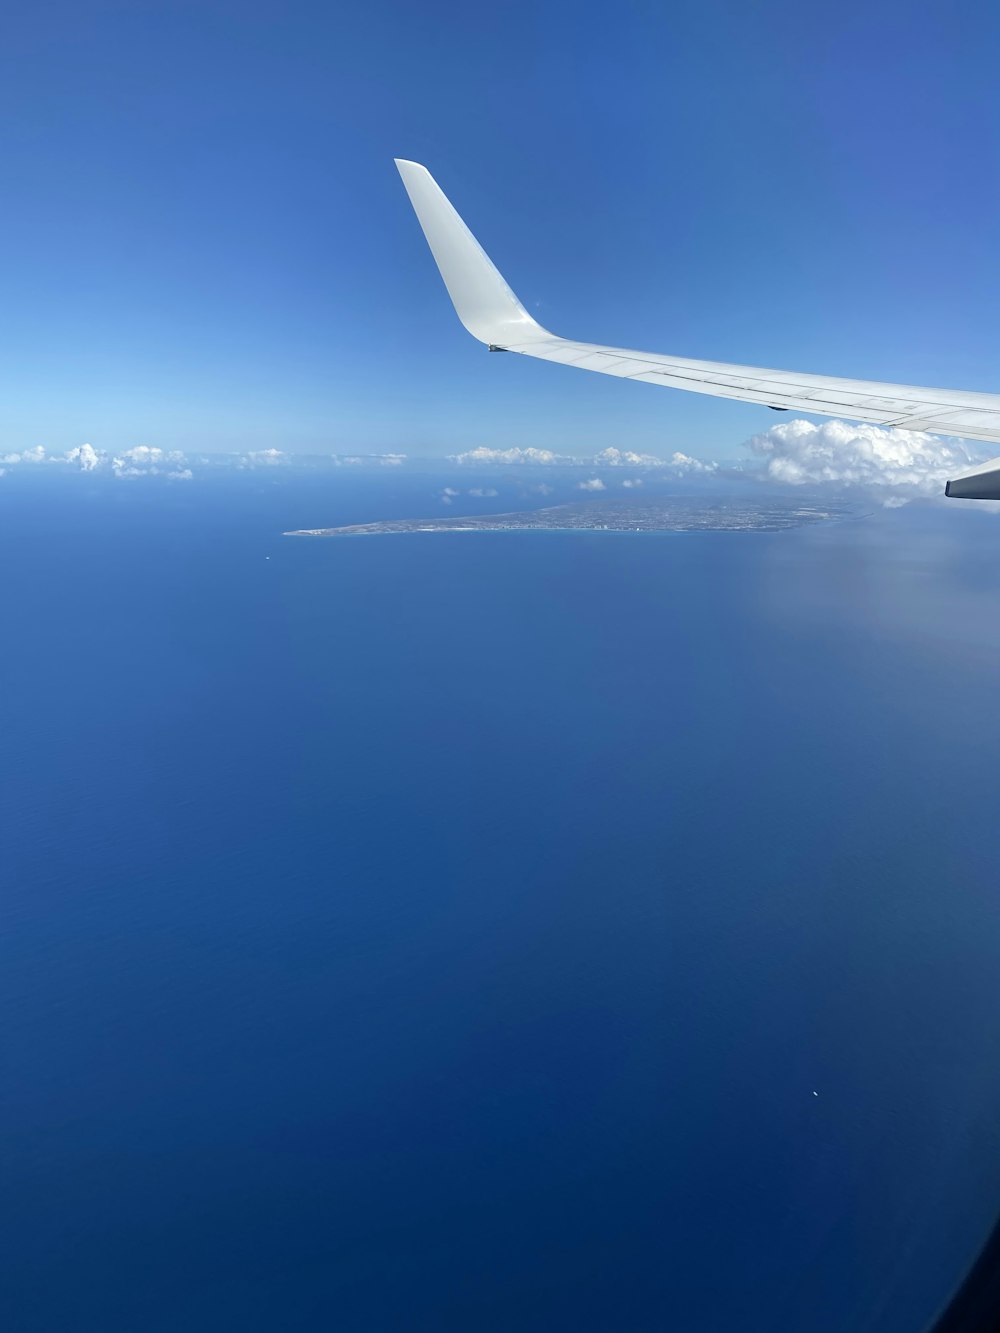 the wing of an airplane flying over the ocean